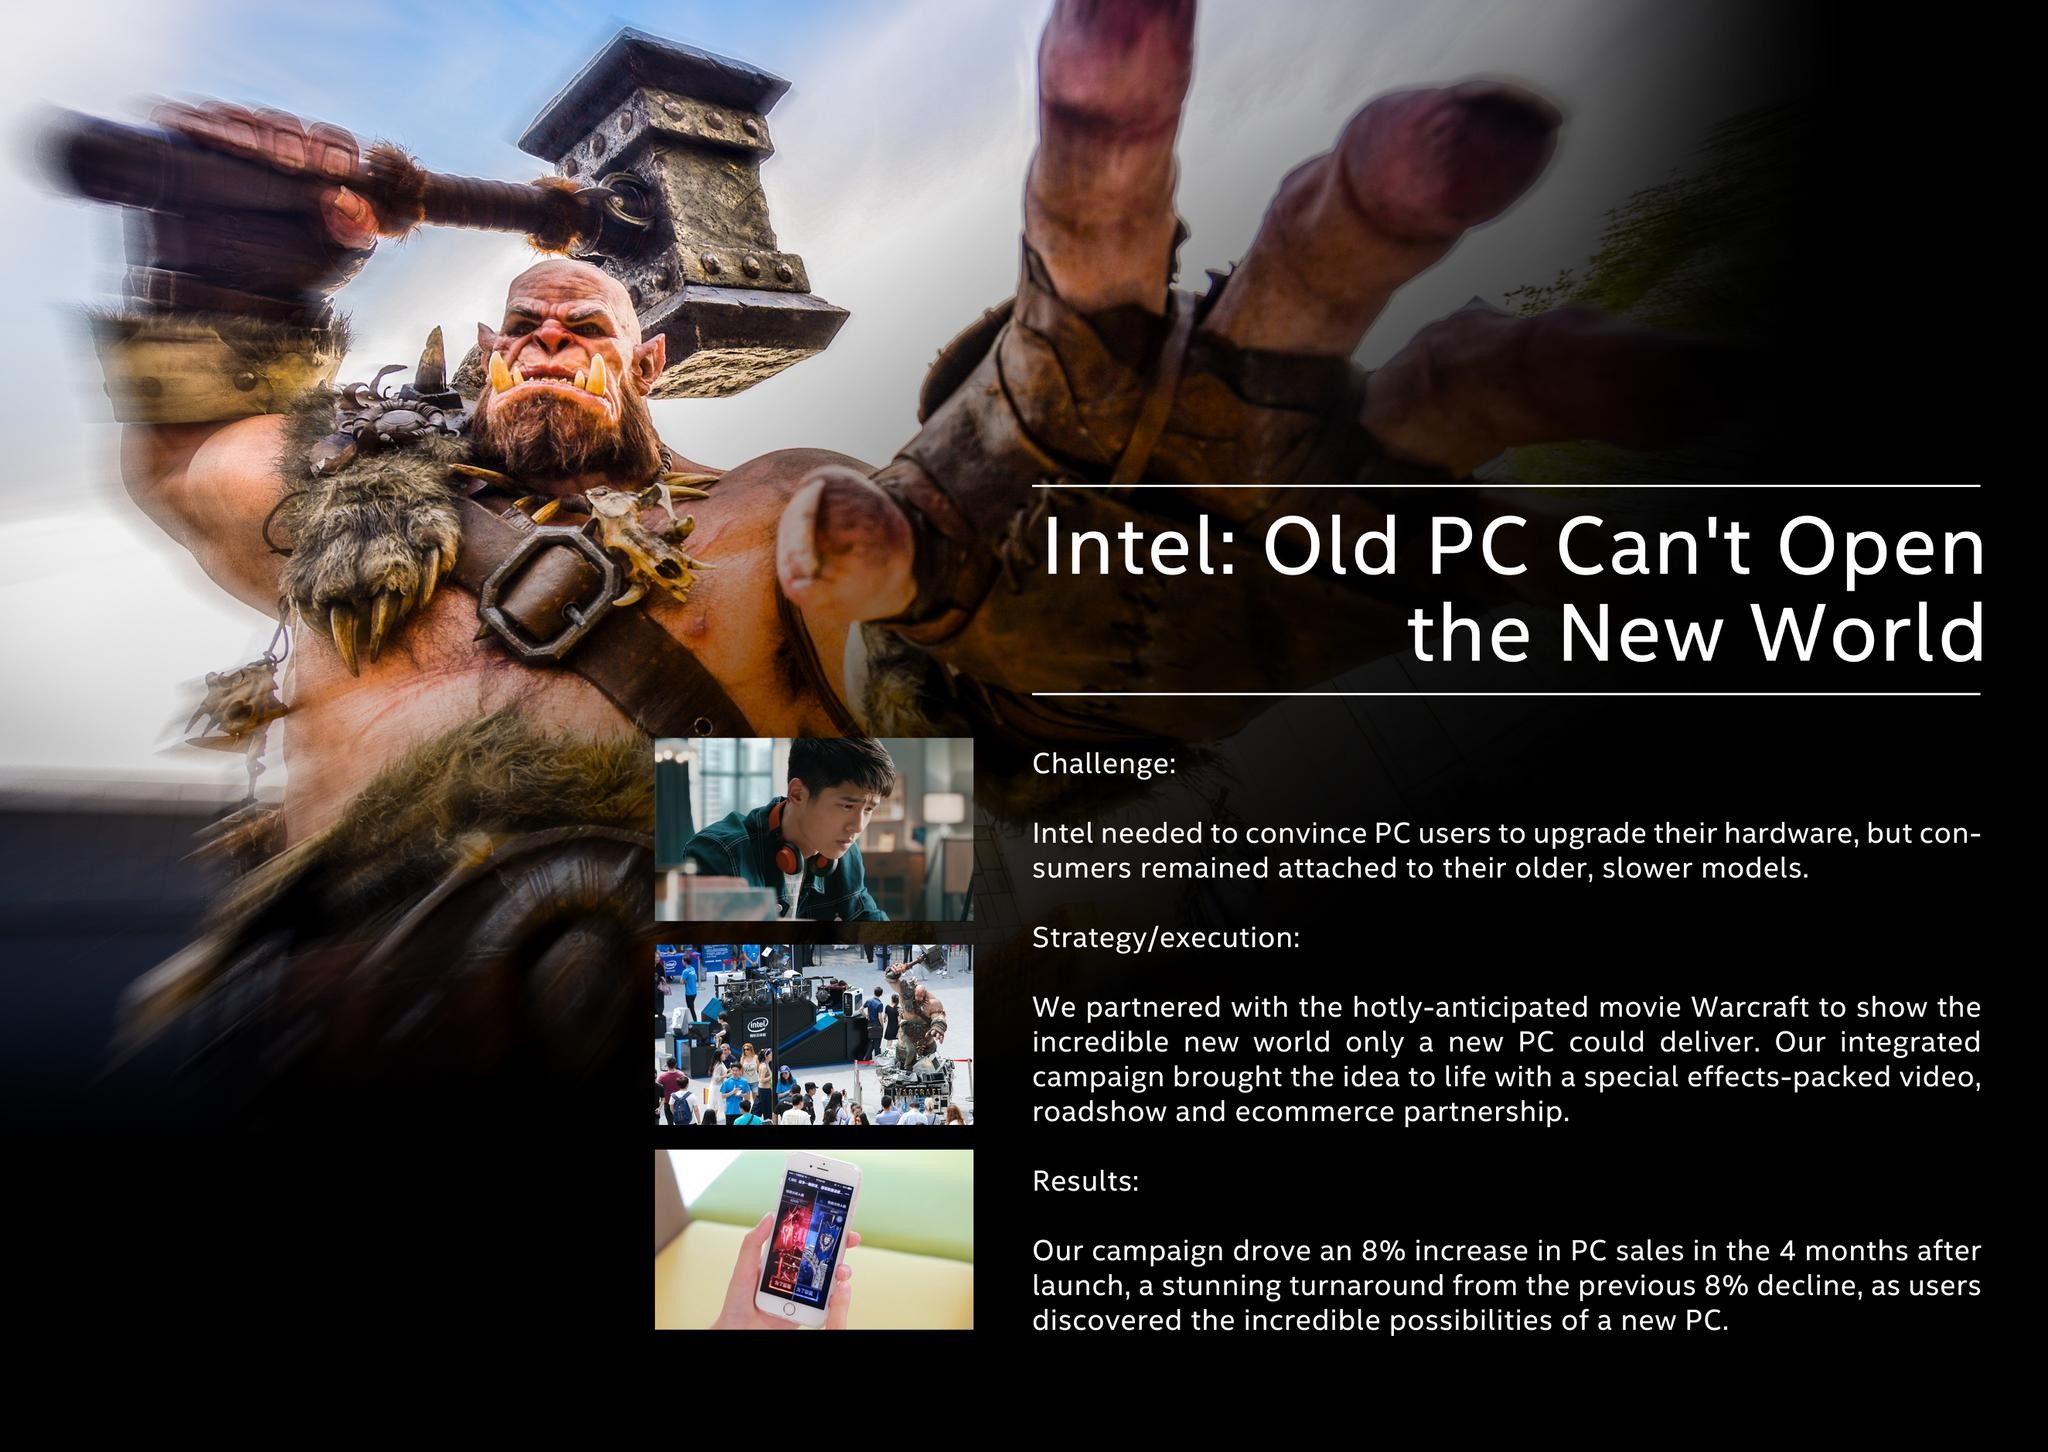 Intel: Old PC Can't Open the New World